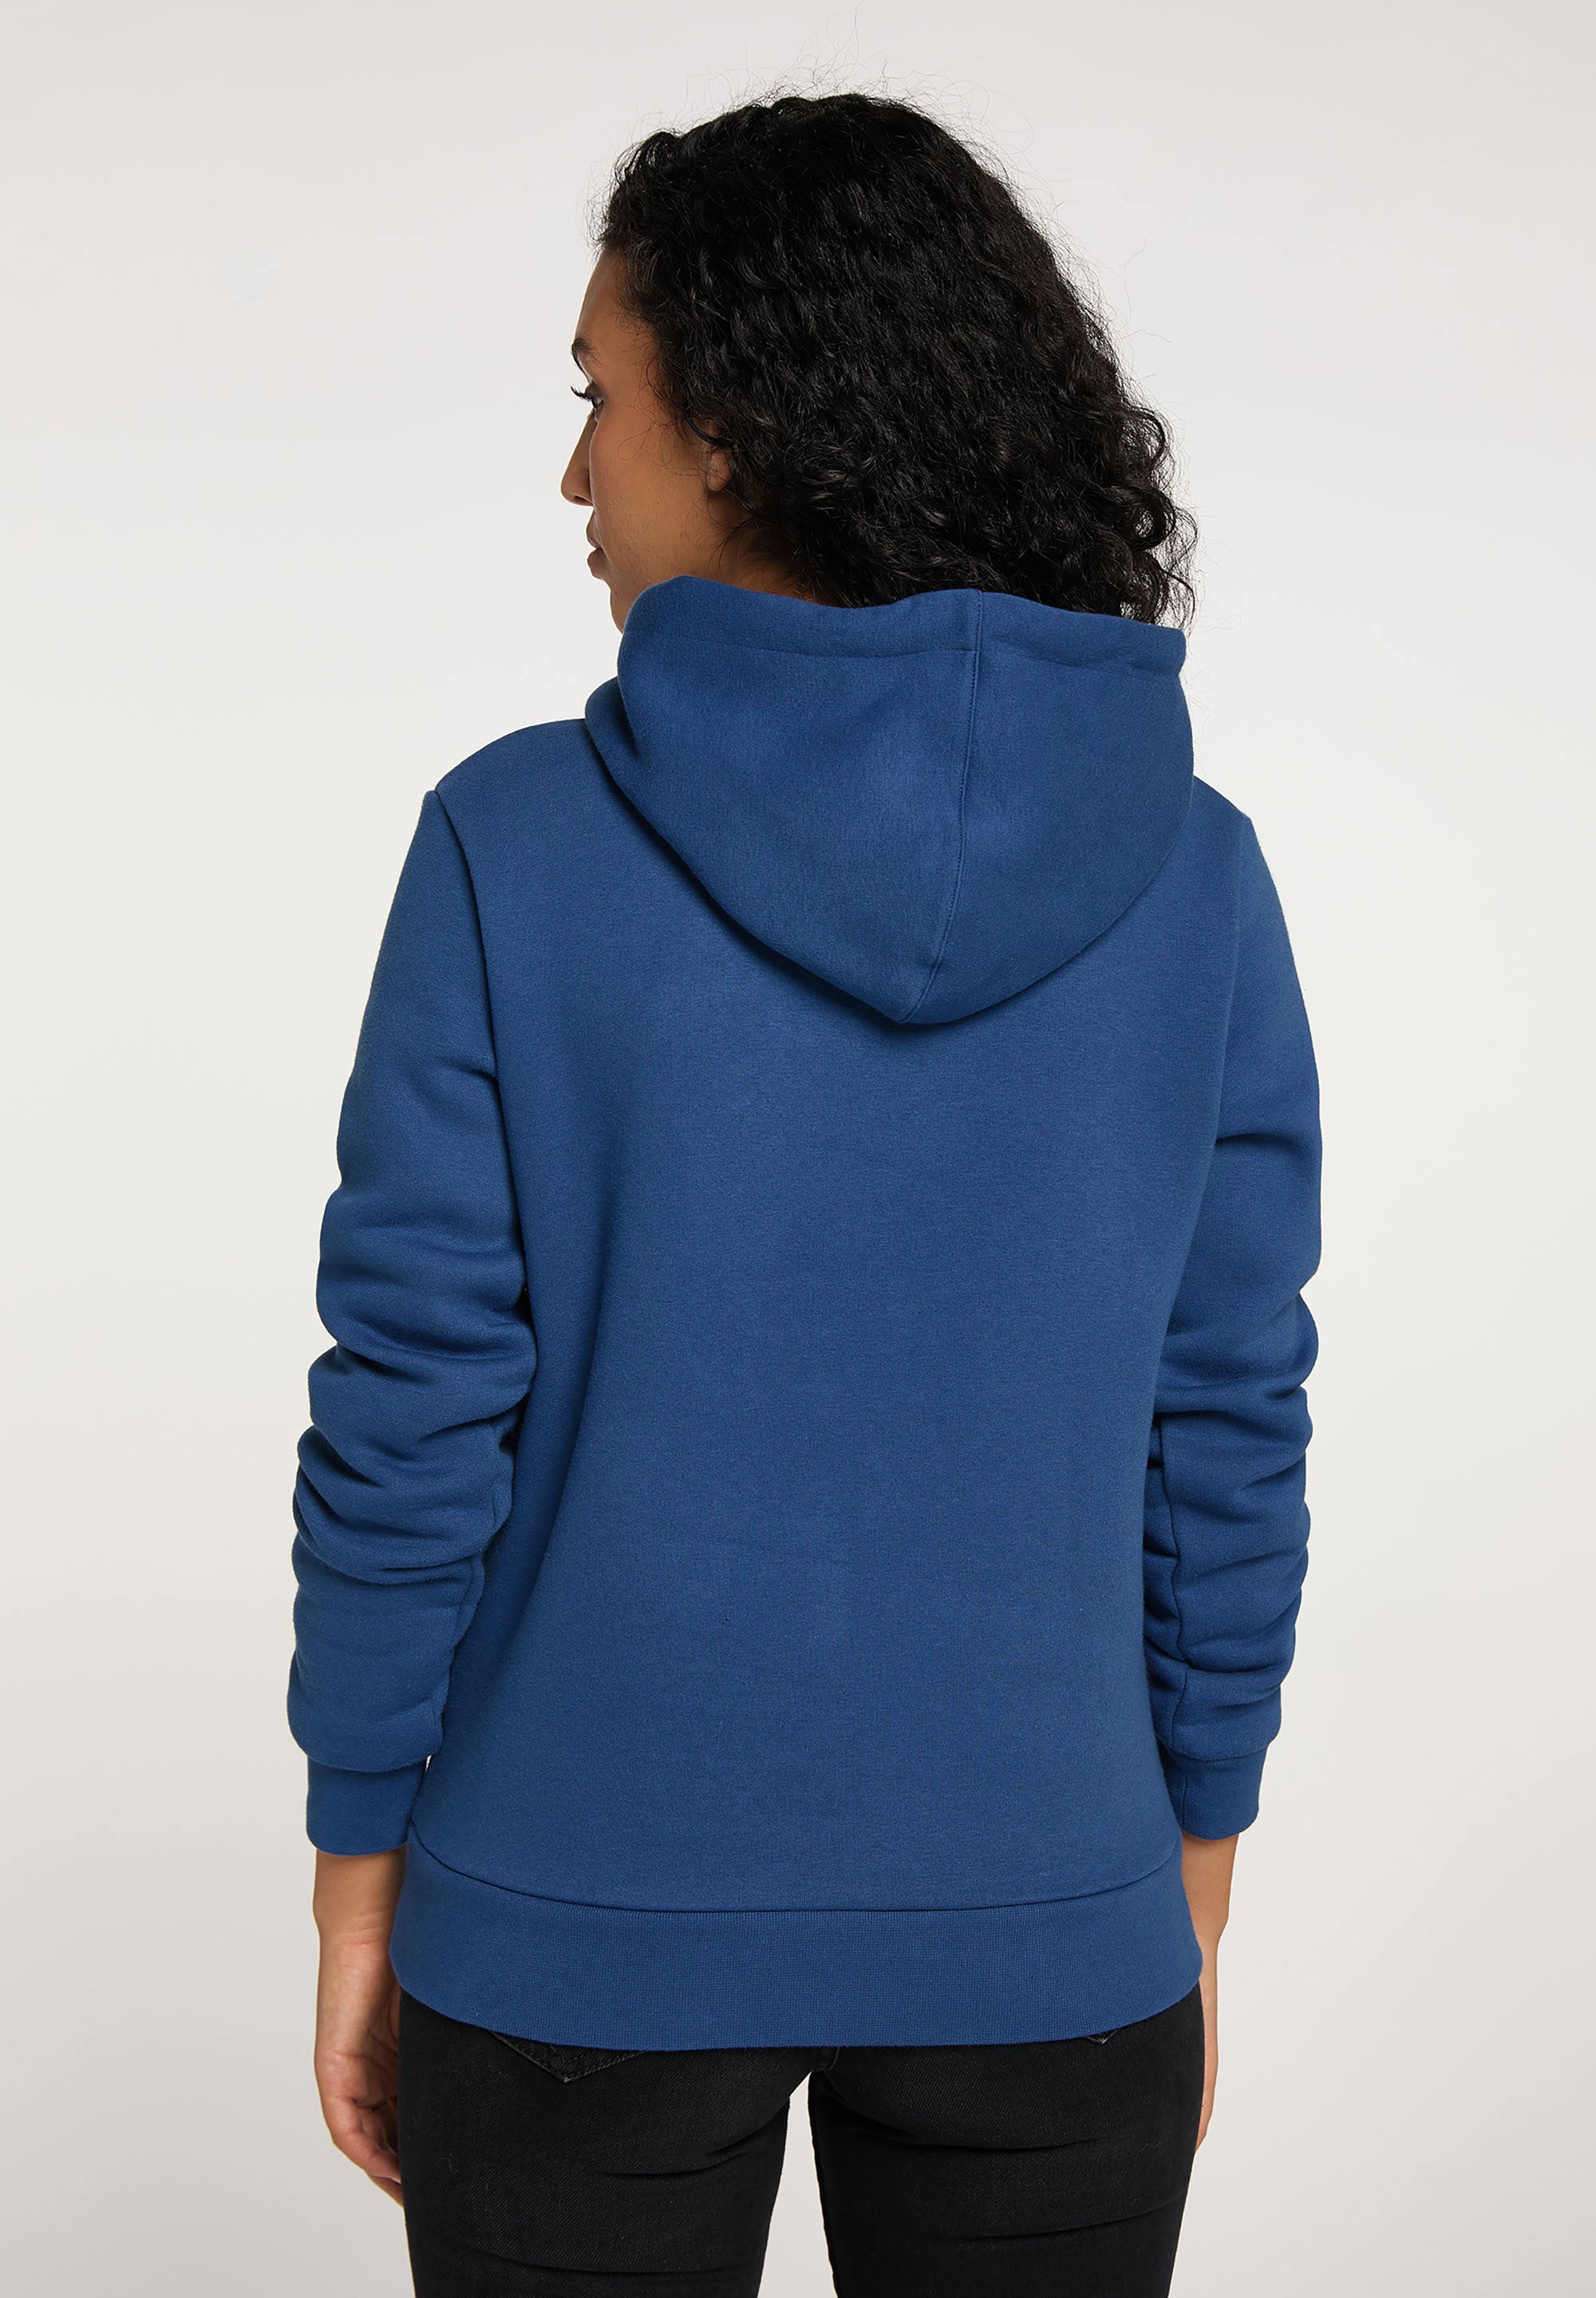 SOMWR REGROW Hoodie NVY031